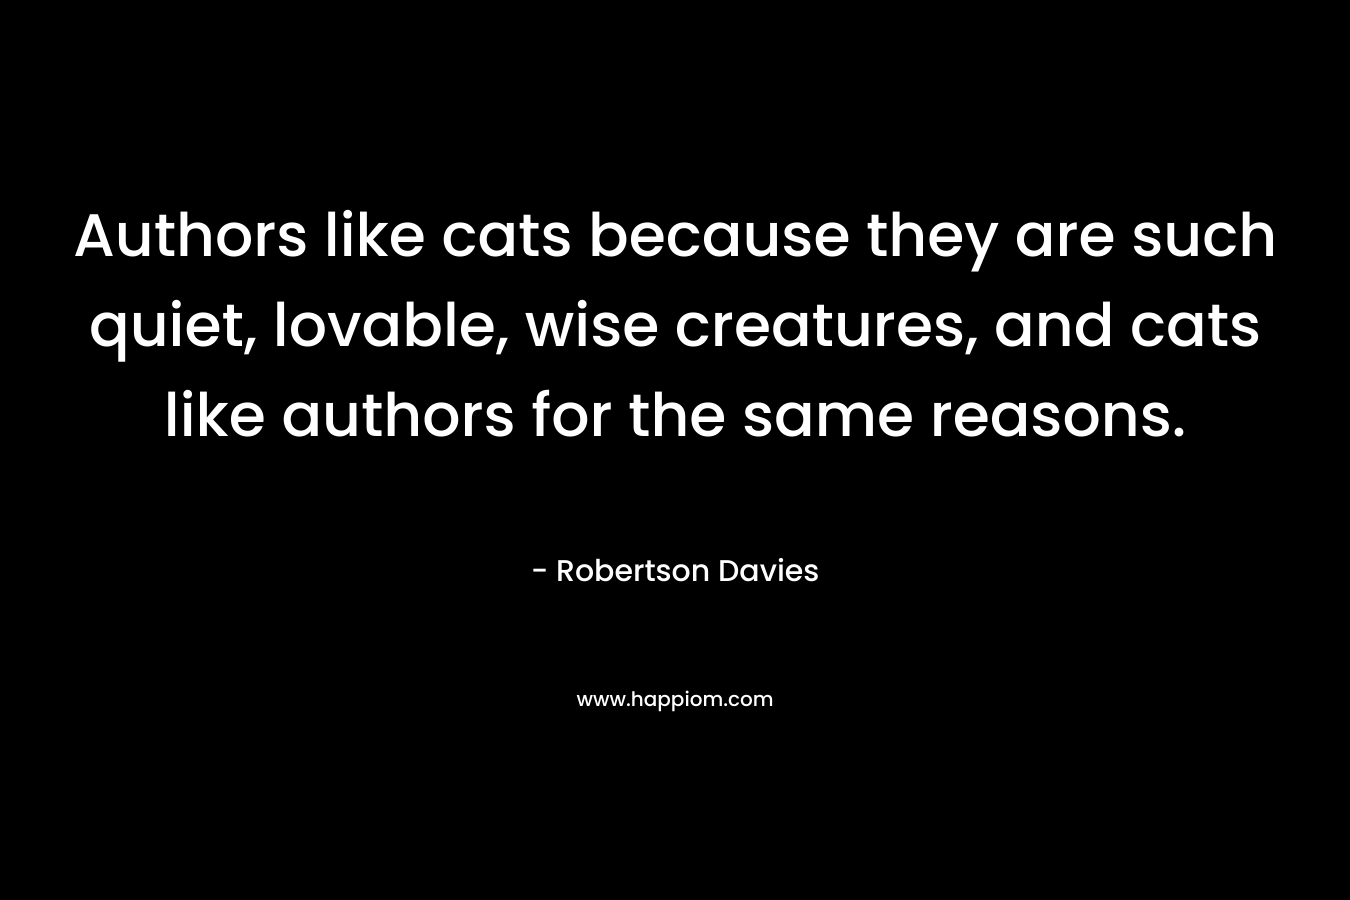 Authors like cats because they are such quiet, lovable, wise creatures, and cats like authors for the same reasons.